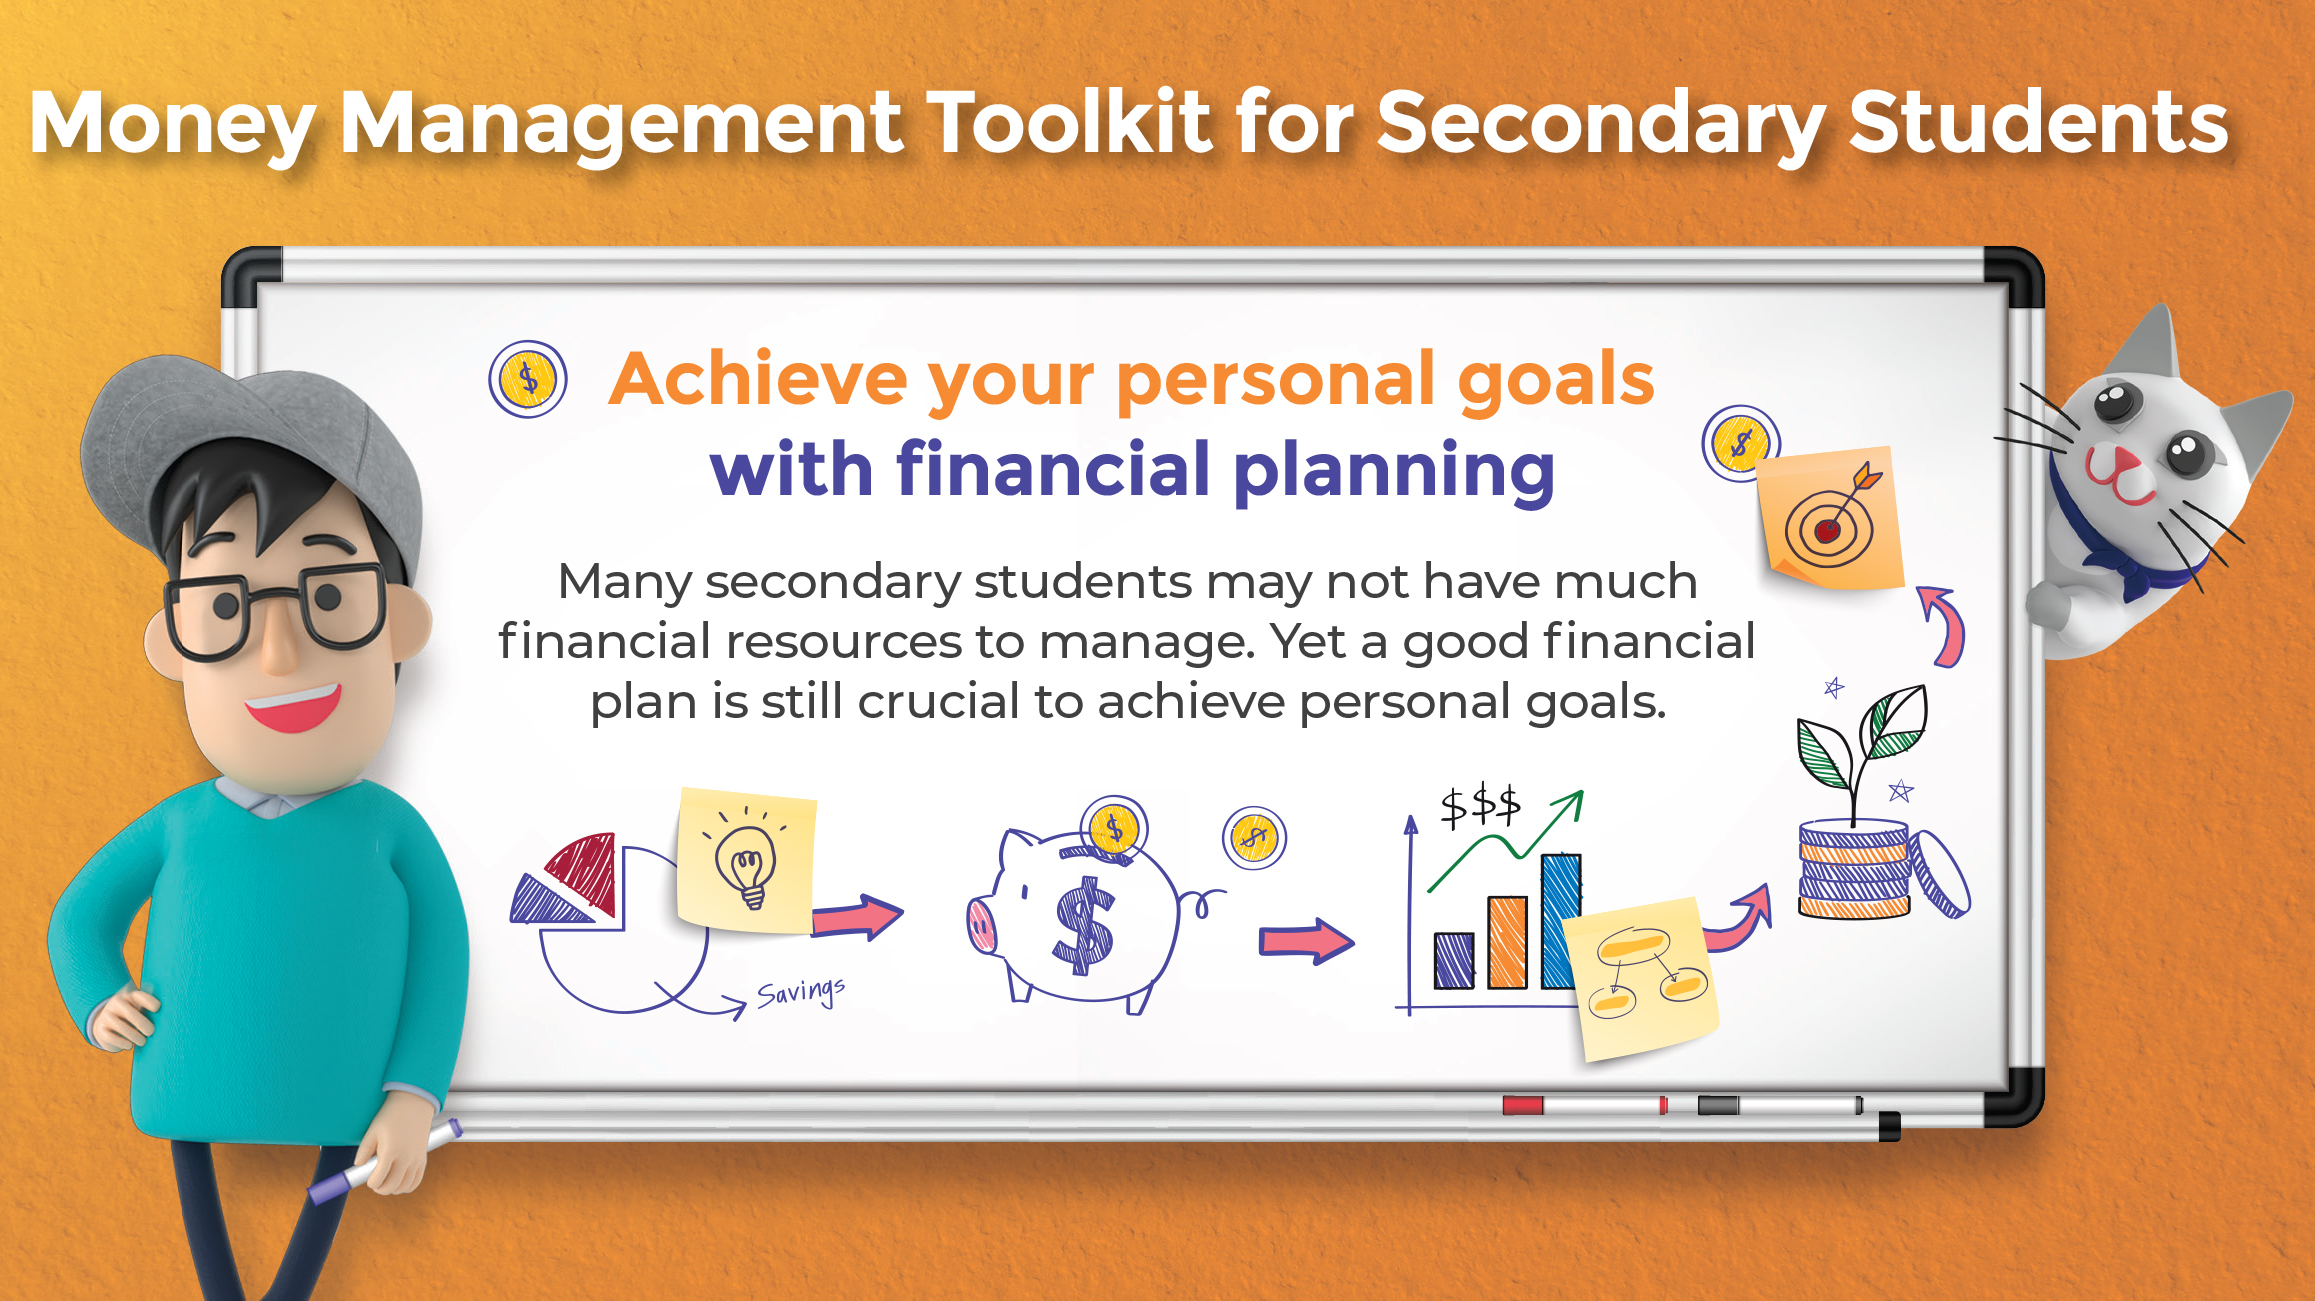 Money Management Toolkit for Secondary Students